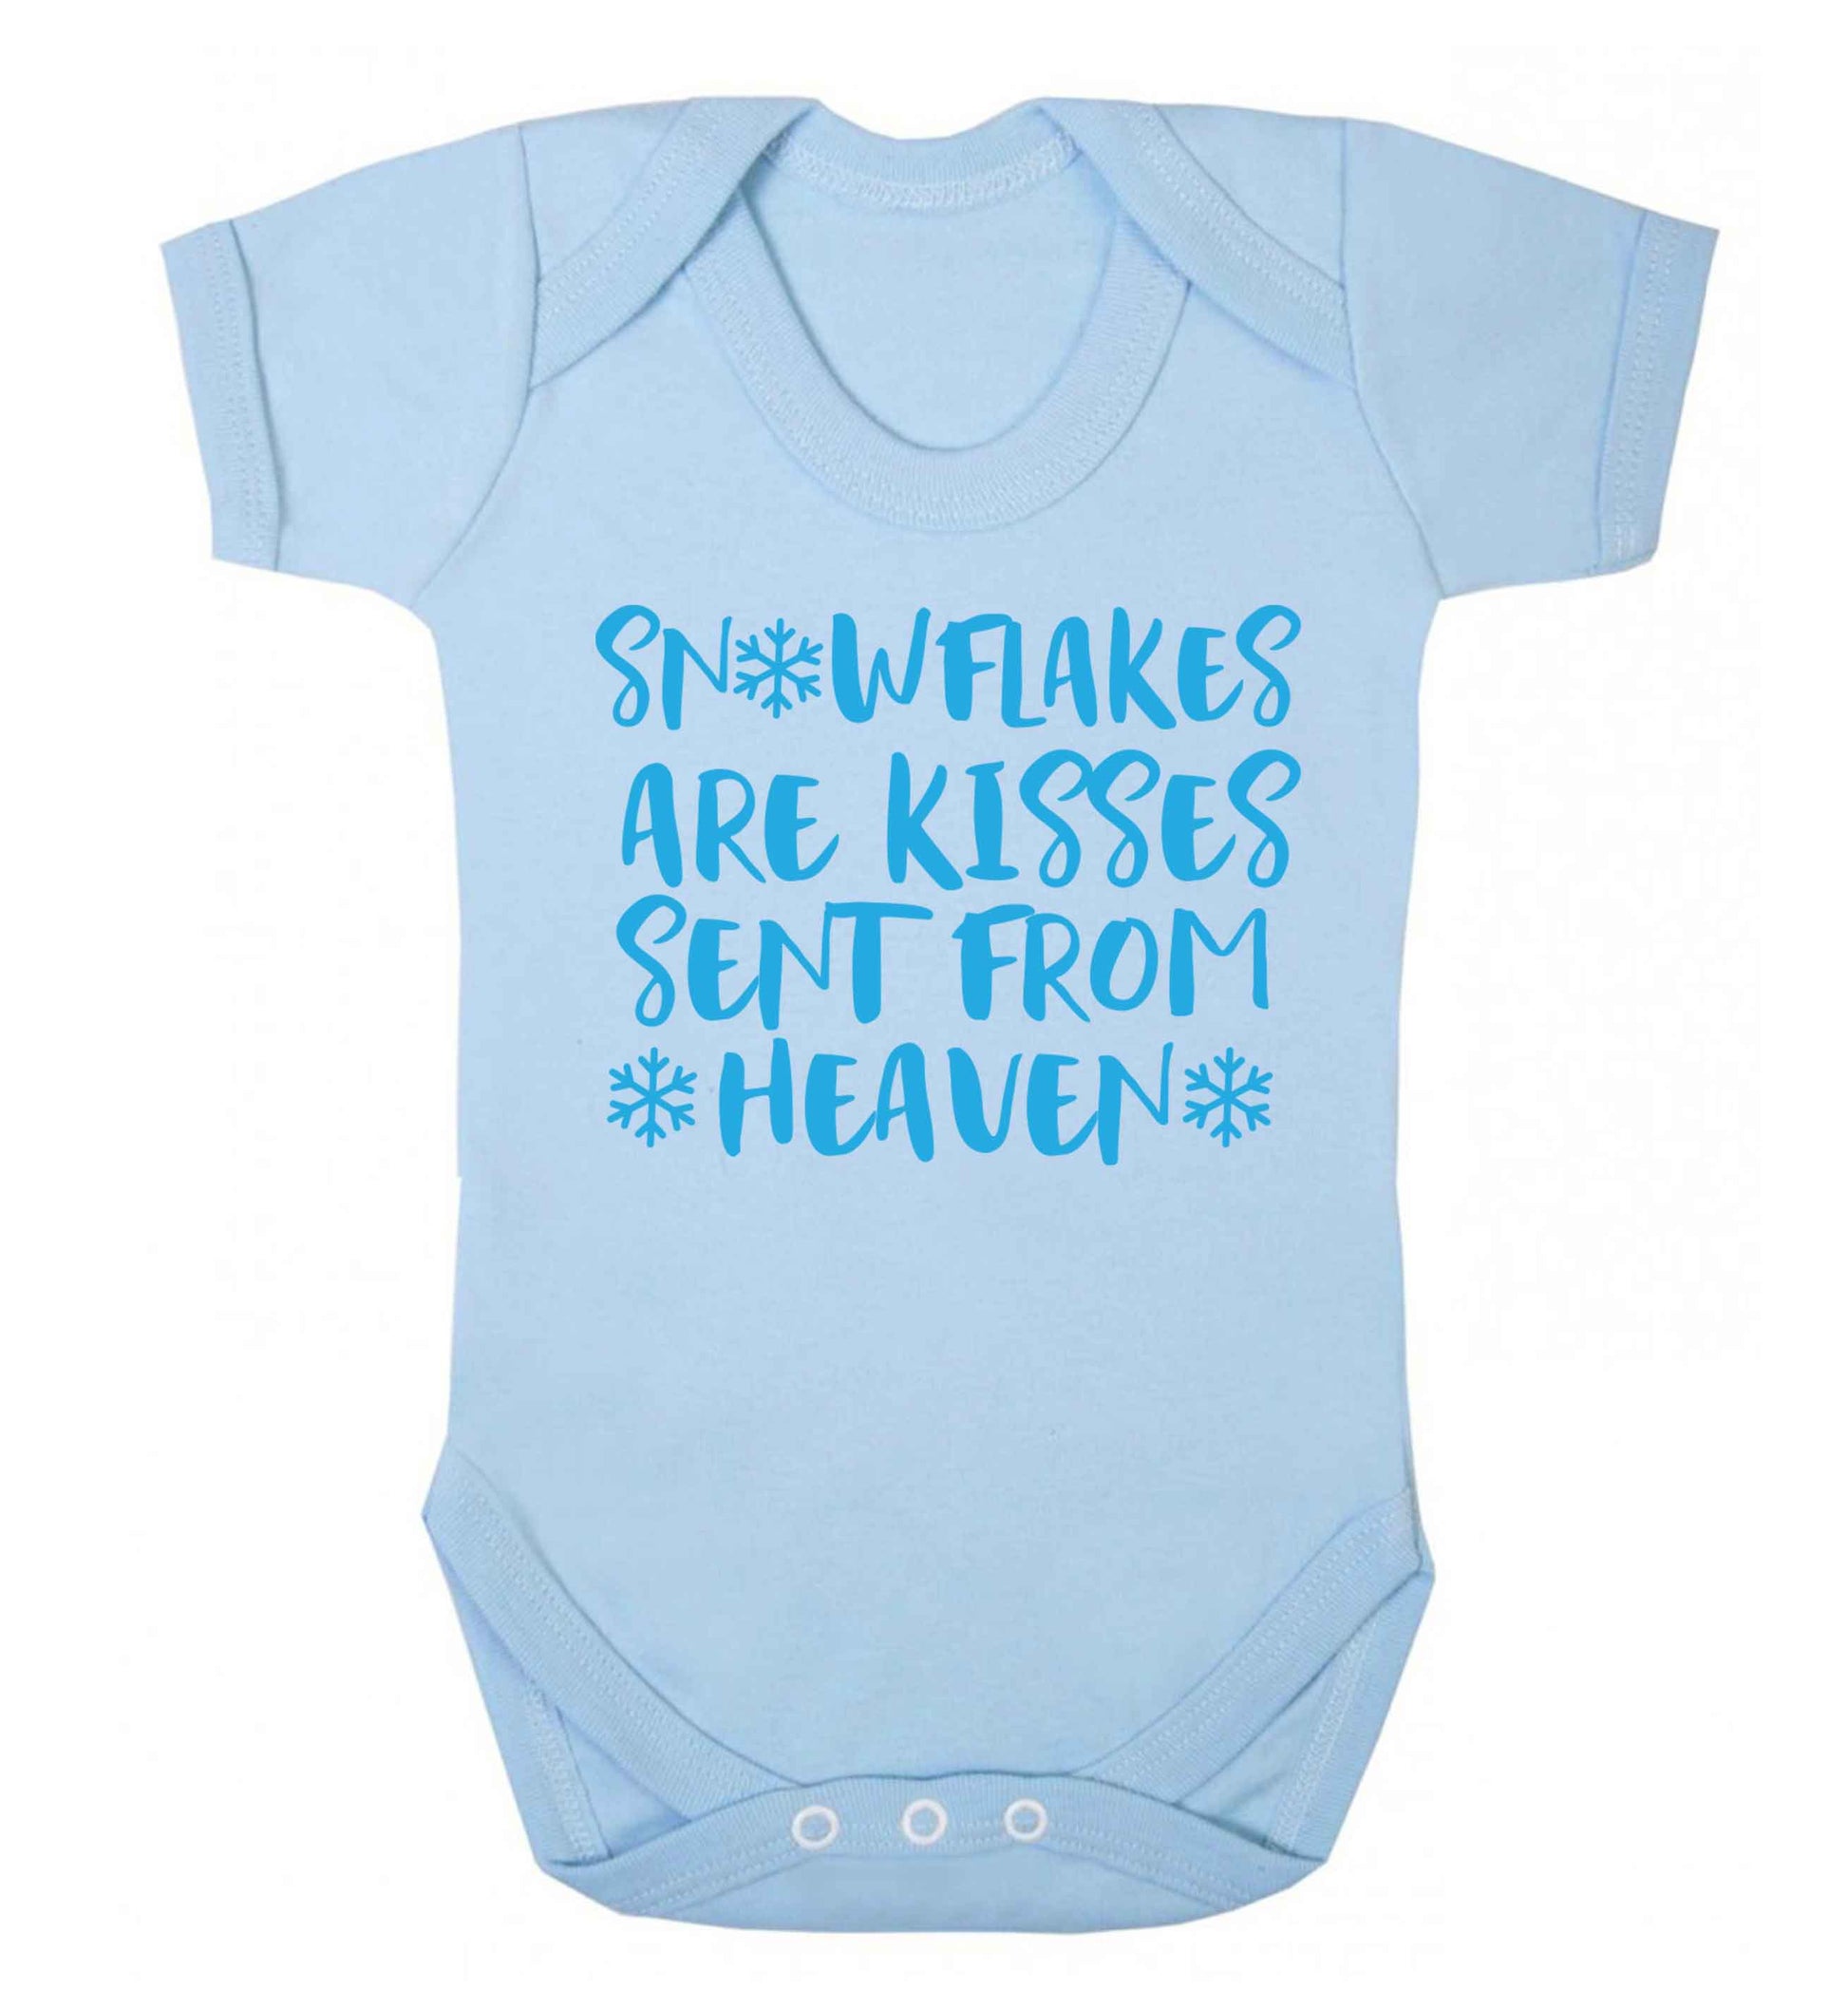 Snowflakes are kisses sent from heaven Baby Vest pale blue 18-24 months